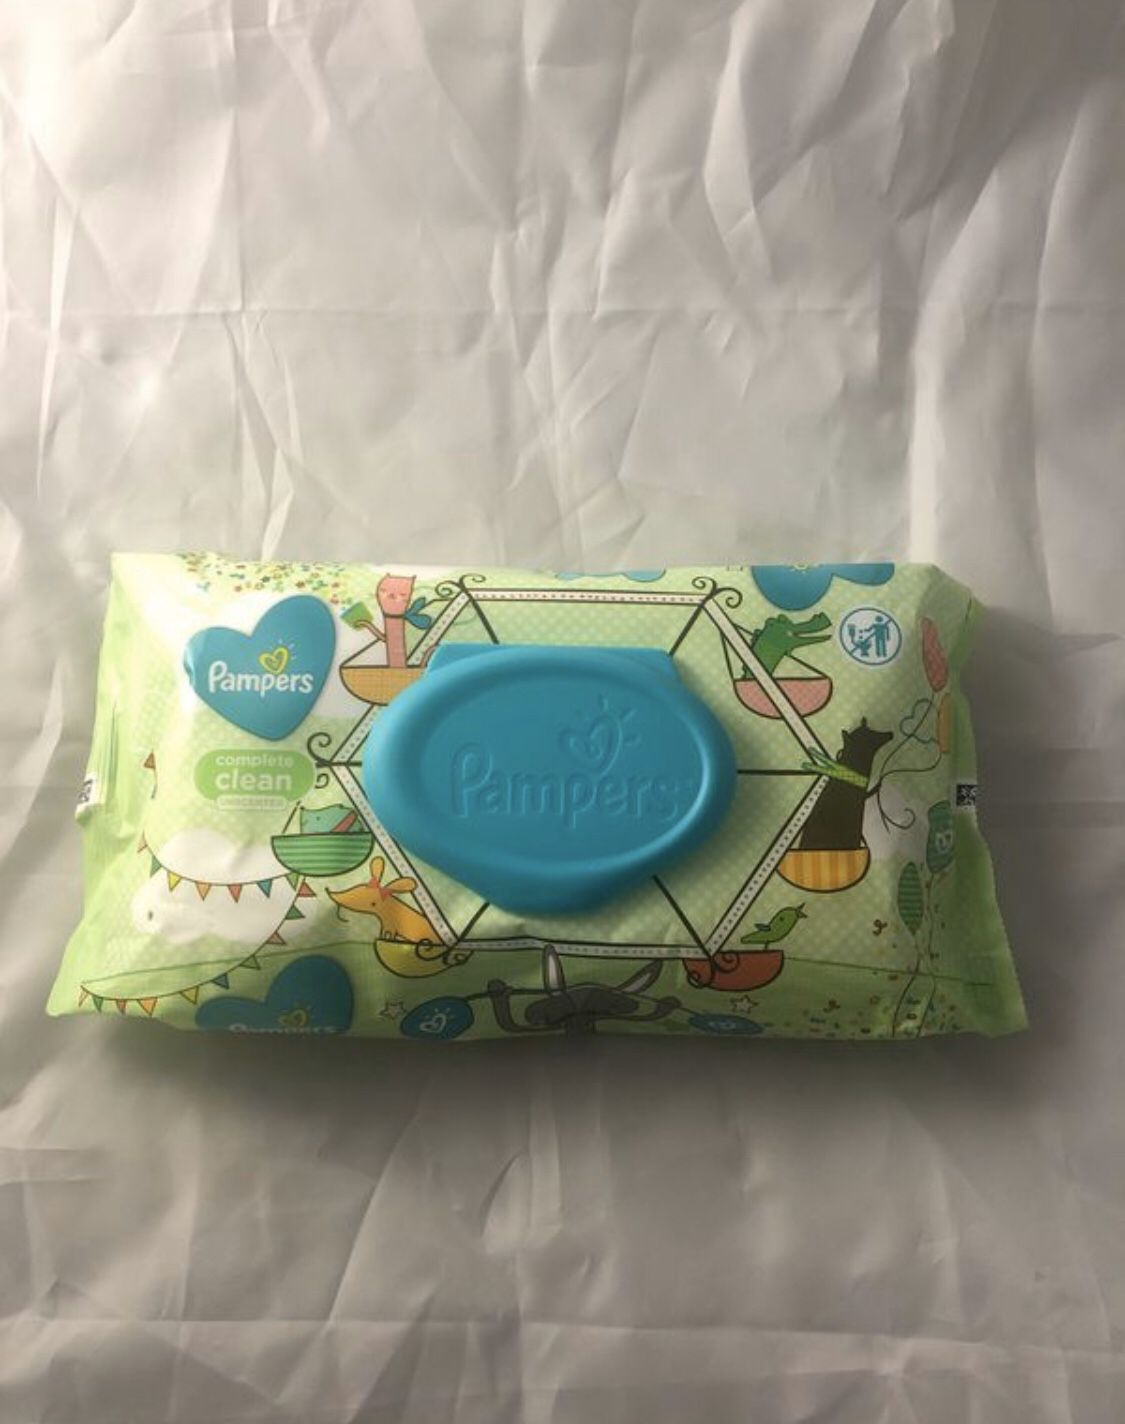 Pampers Baby Wipes Complete Clean Unscented 72 ct.